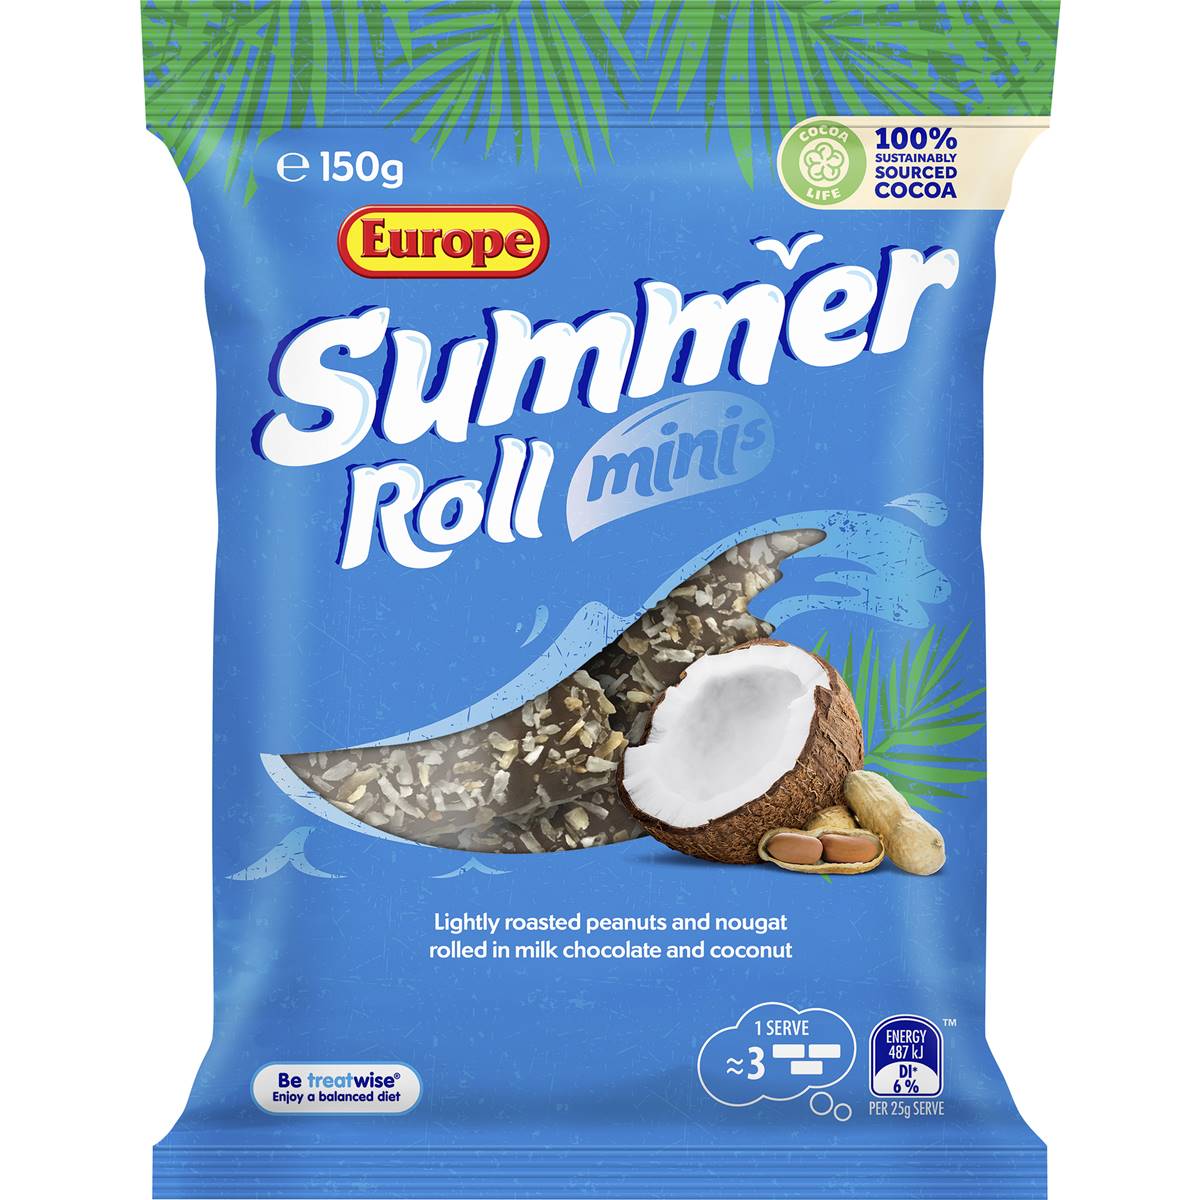 Calories in Europe Summer Roll Minis